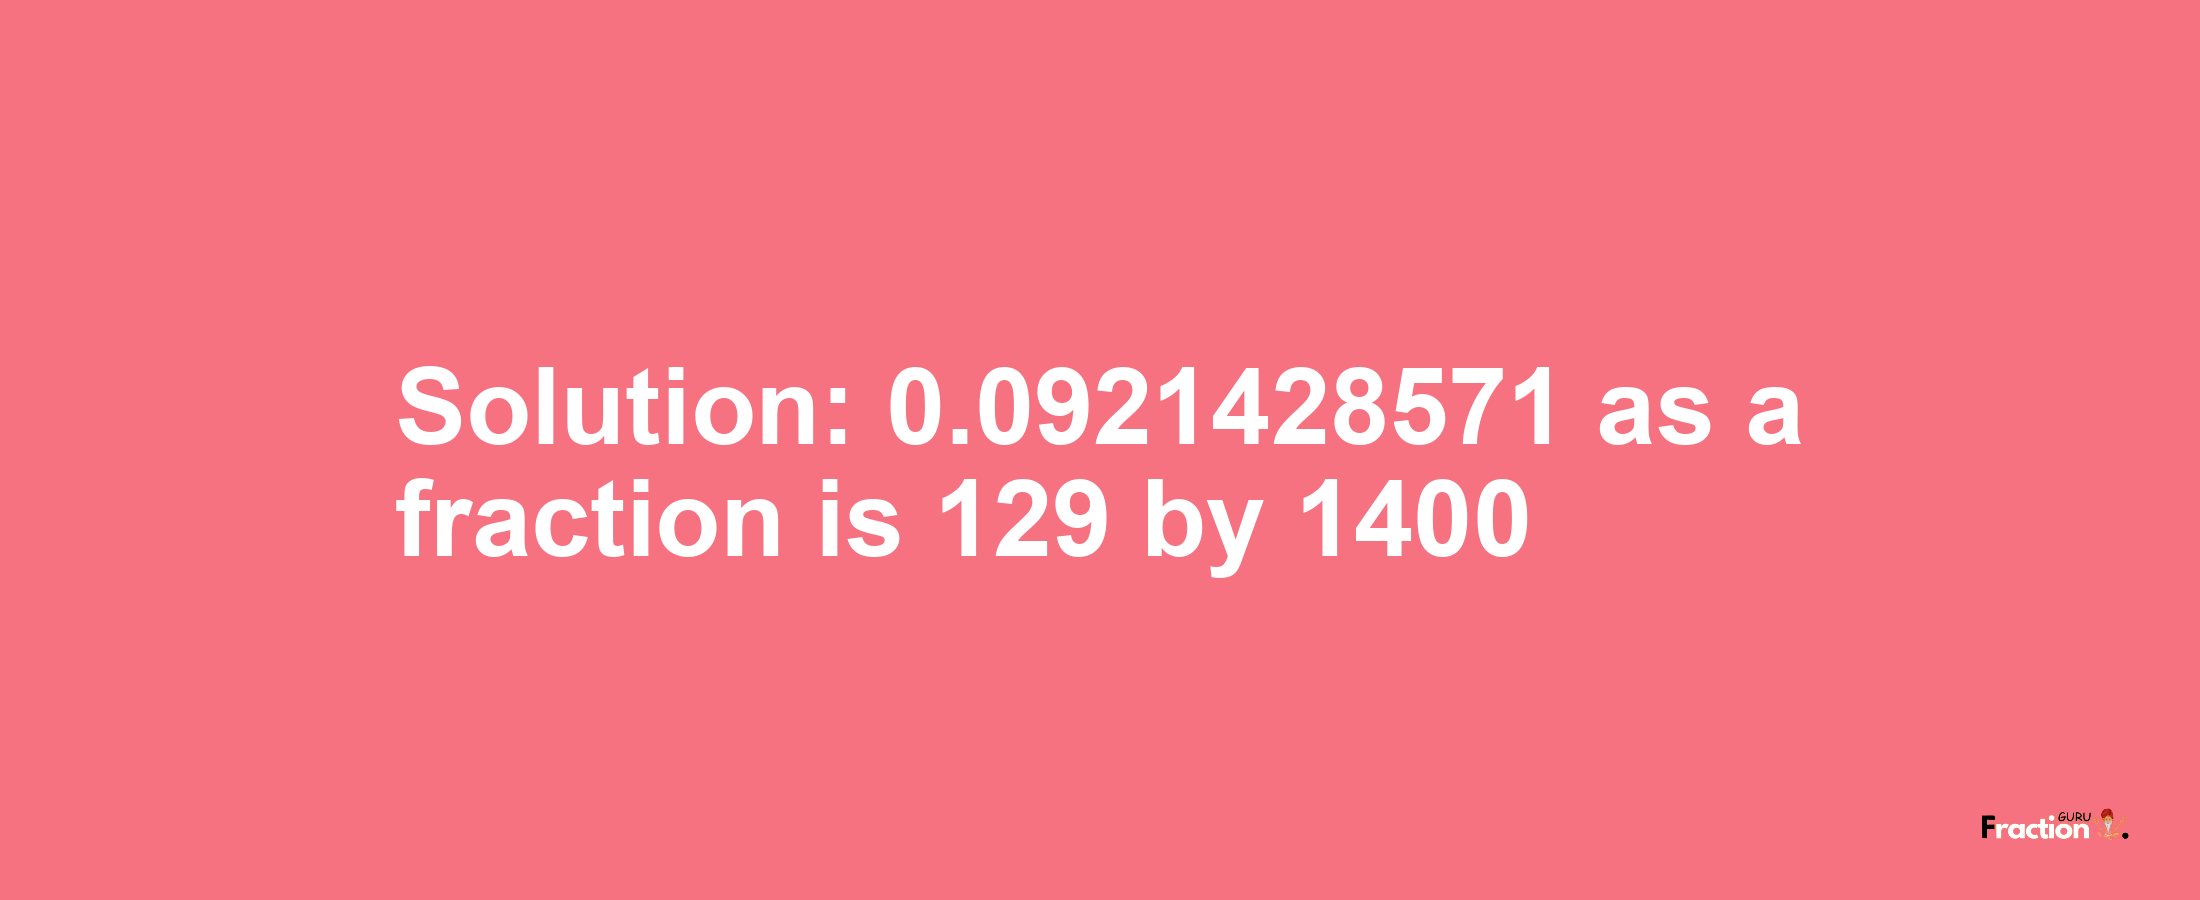 Solution:0.0921428571 as a fraction is 129/1400